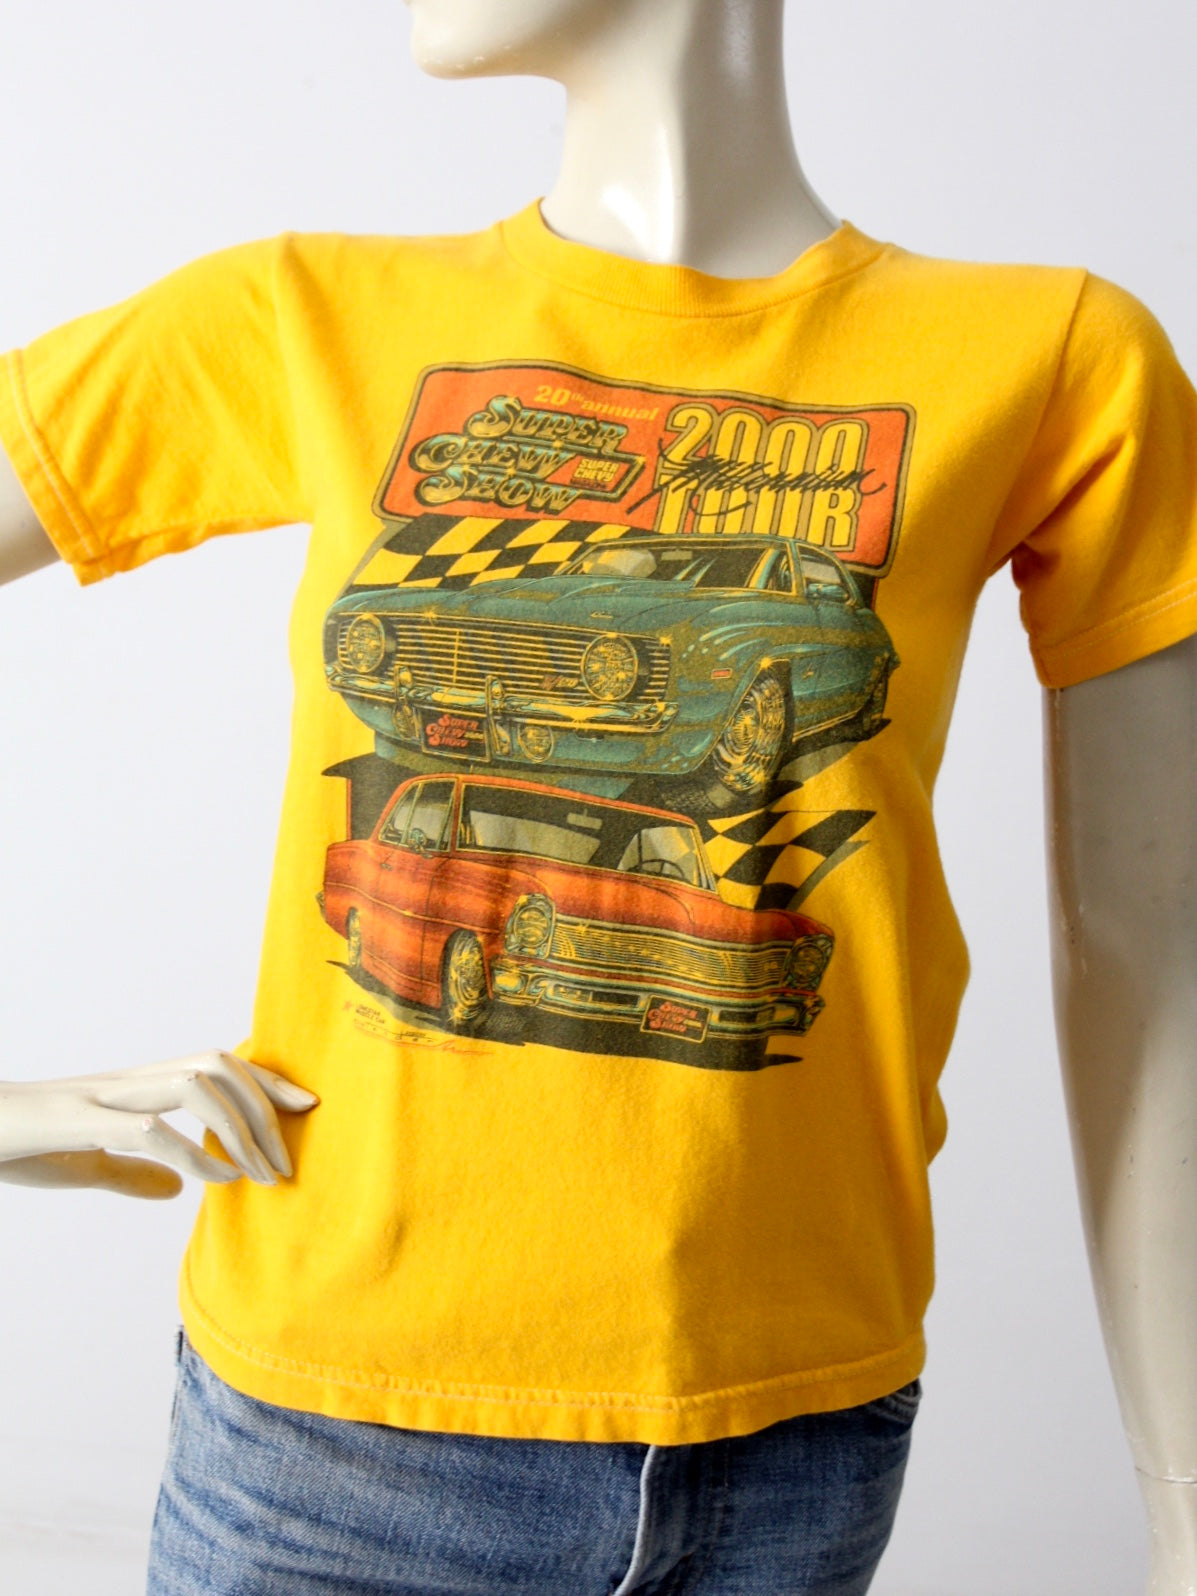 vintage Super Chevy Show graphic tee